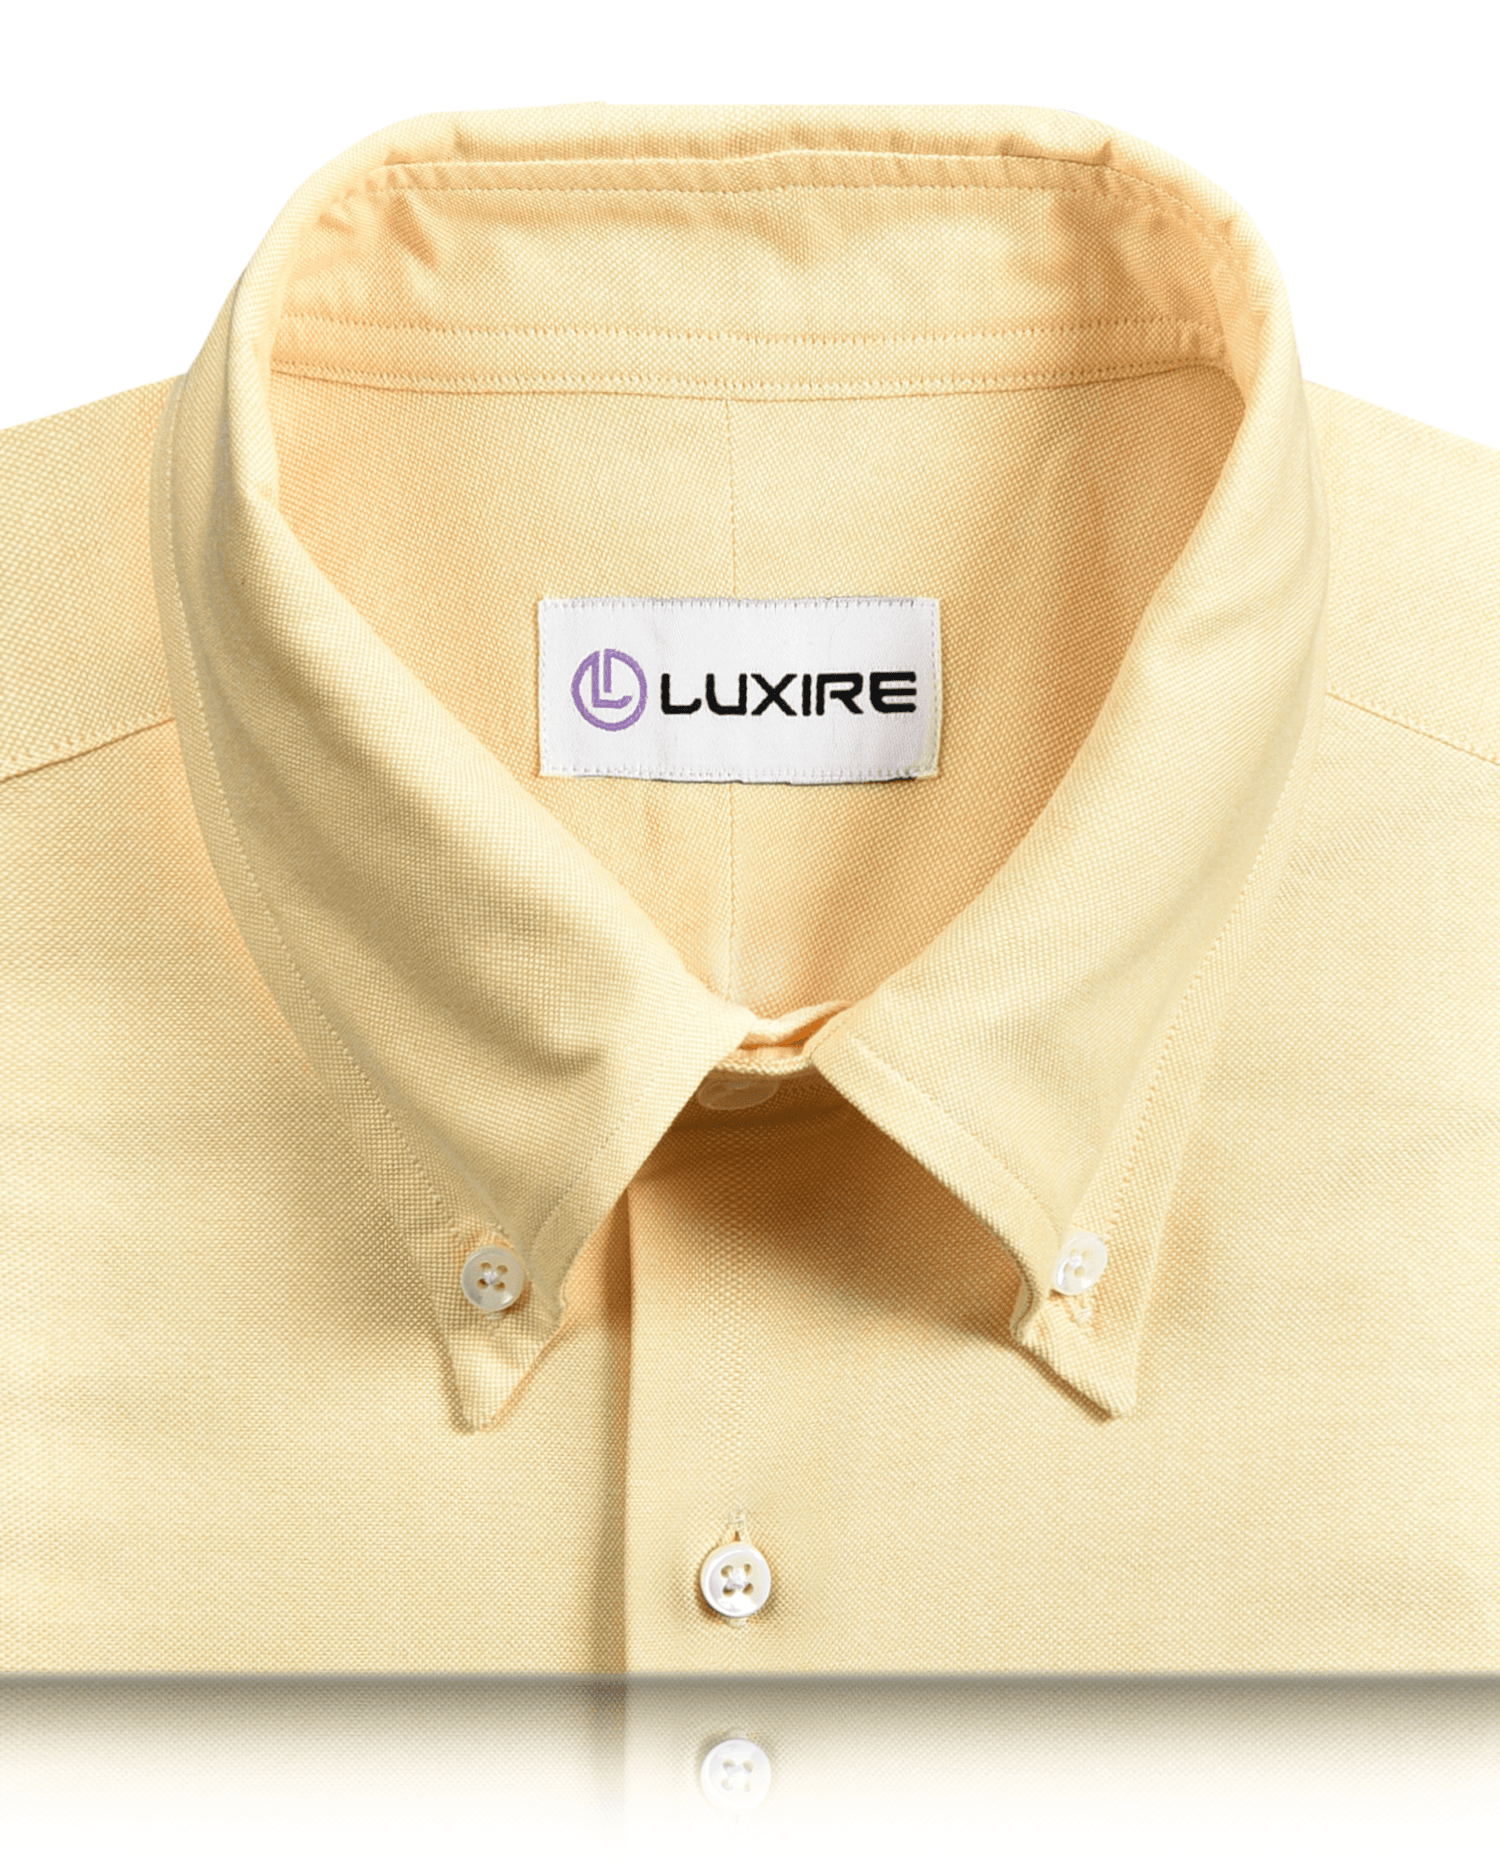 Collar of the custom oxford shirt for men by Luxire in dark yellow